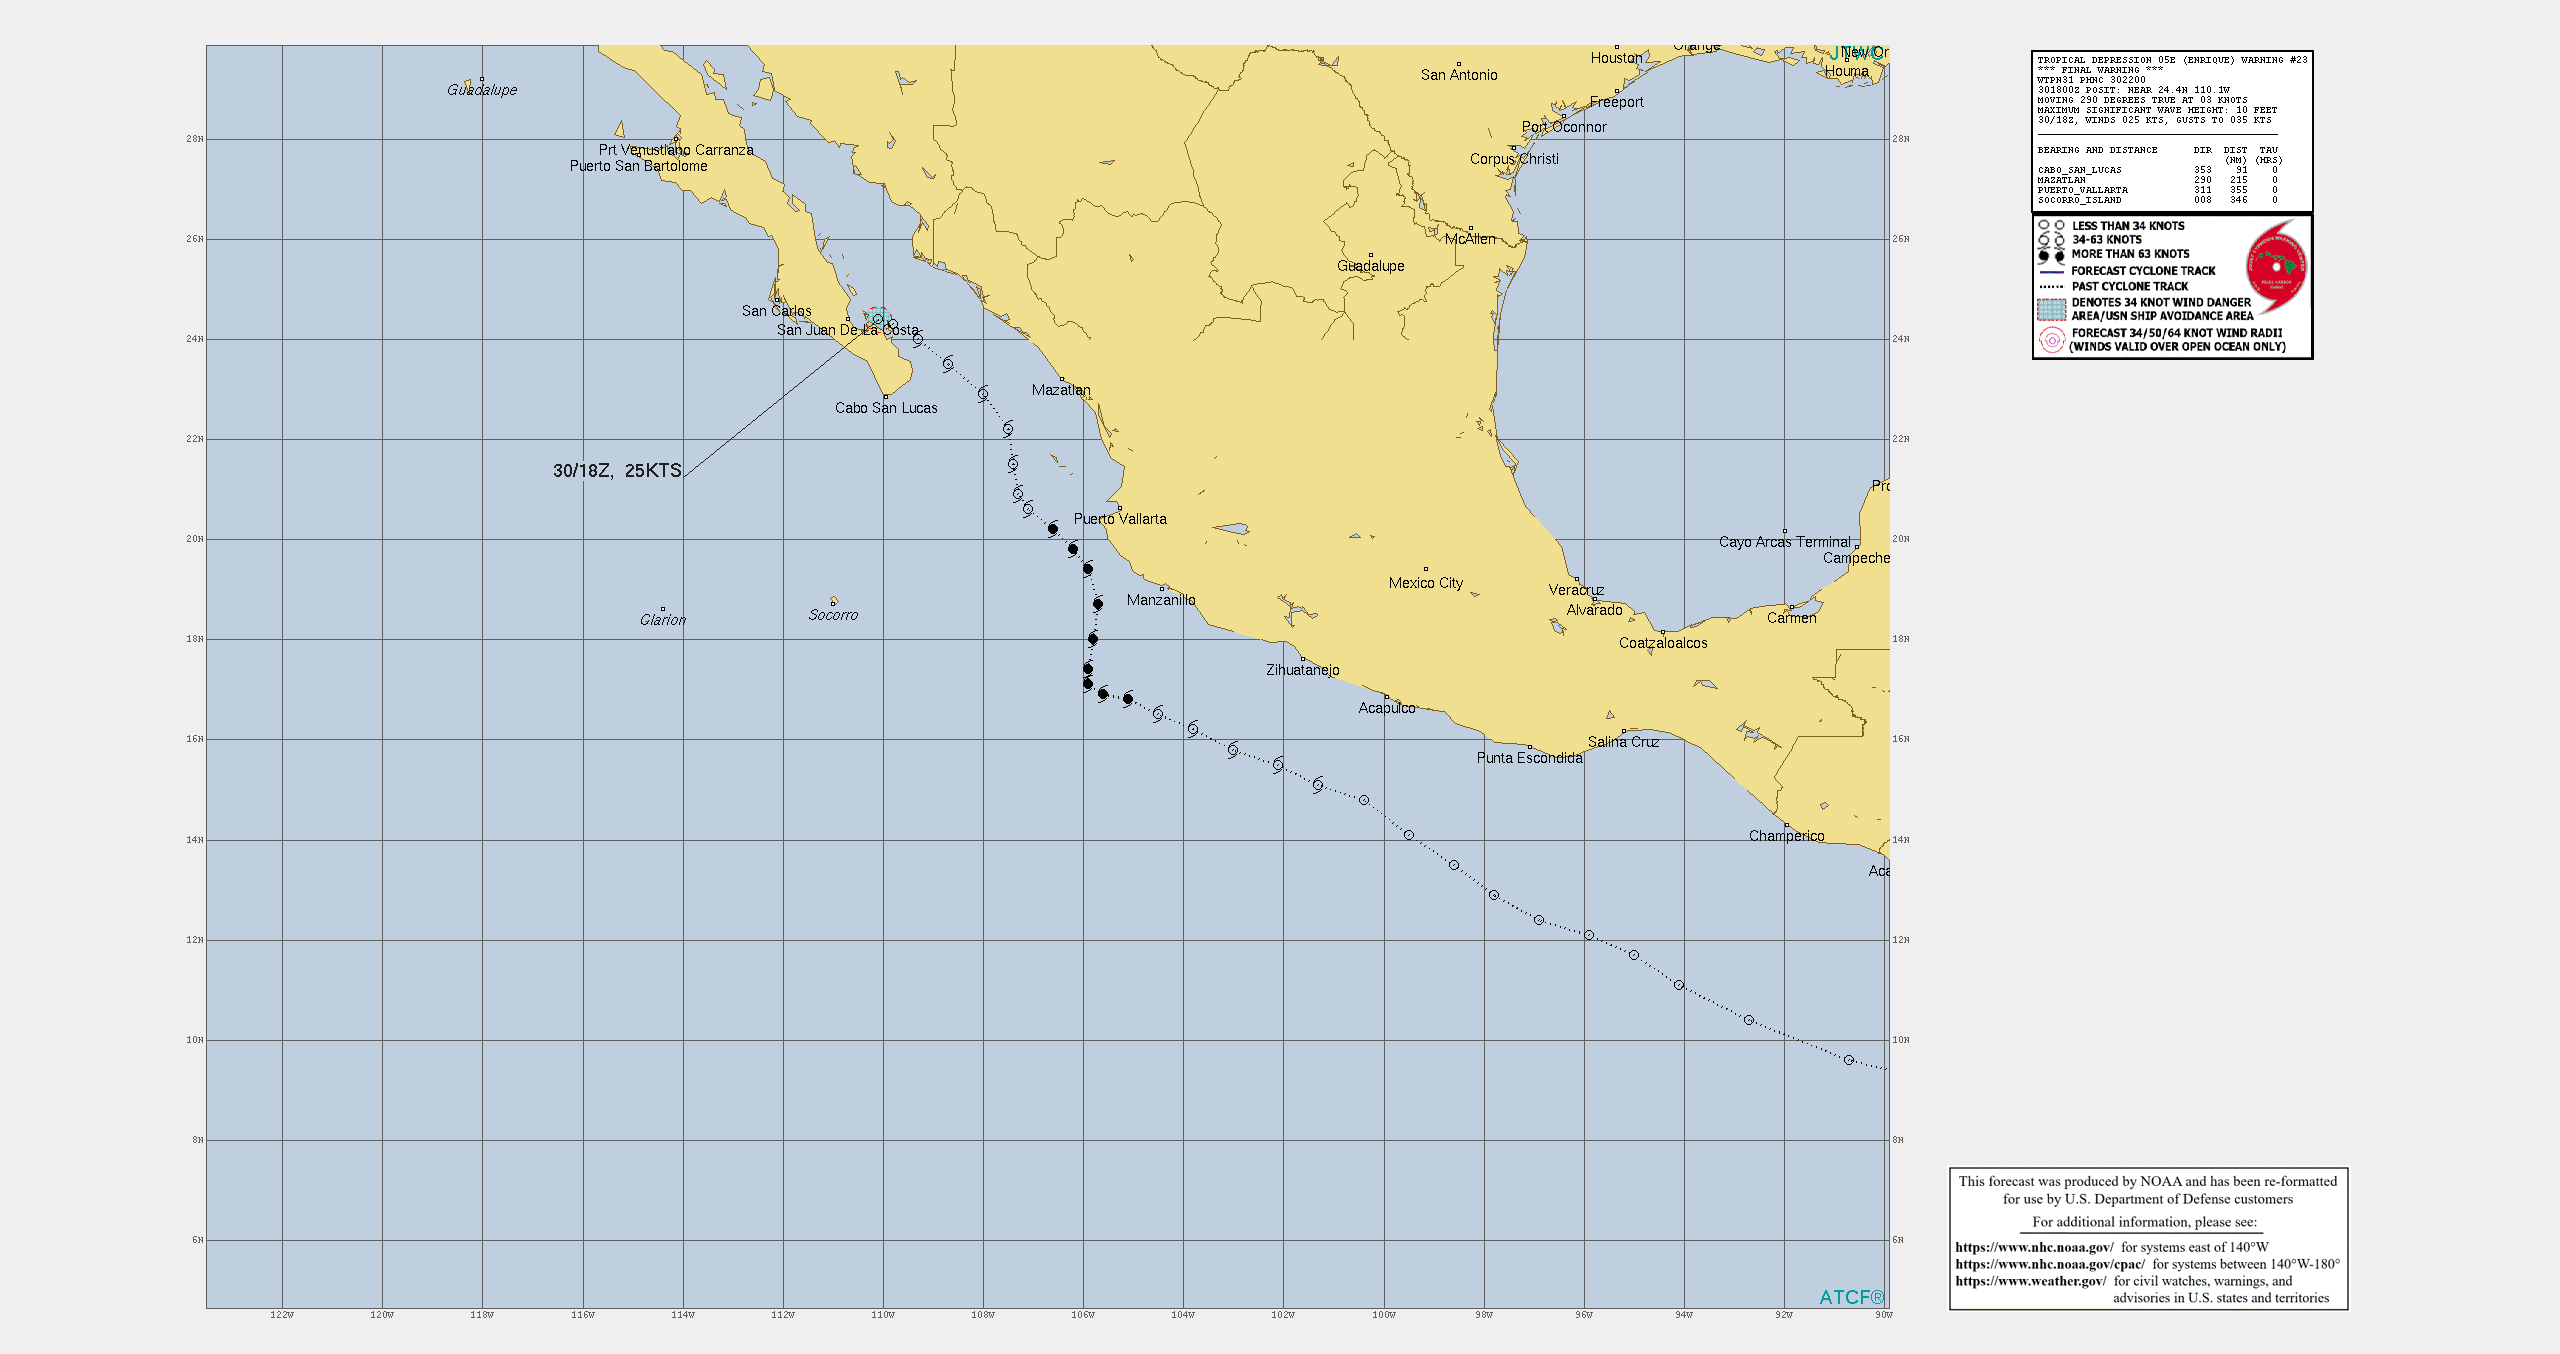 EASTERN NORTH PACIFIC. 05E(ENRIQUE). FINAL WARNING ISSUED AT 30/22UTC. PEAK INTENSITY WAS 80KNOTS/CAT 1.